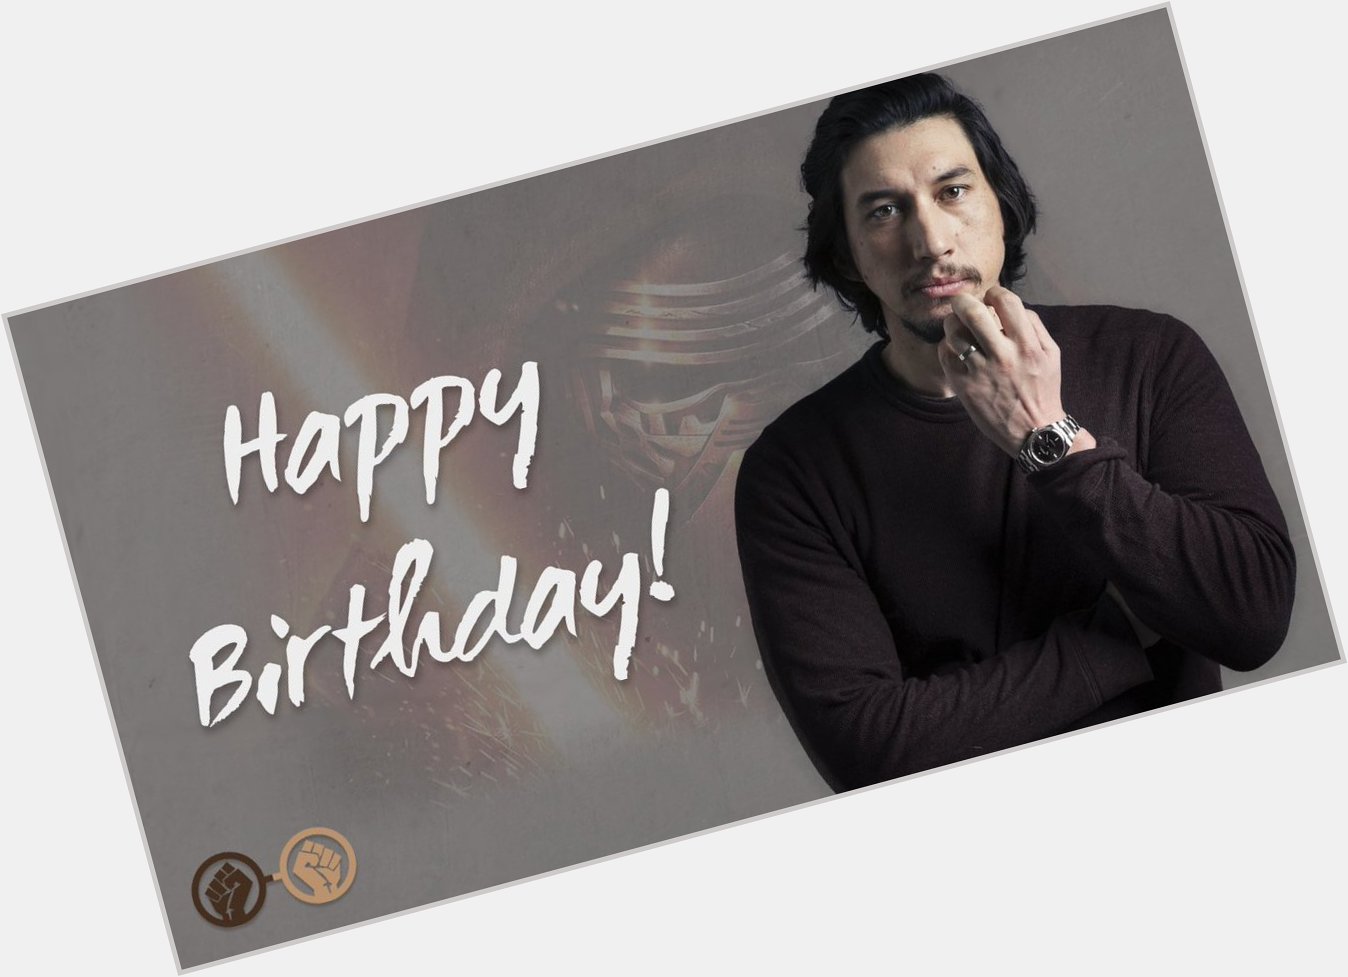 Happy Birthday, Adam Driver! The Star Wars actor turns 34 today! 